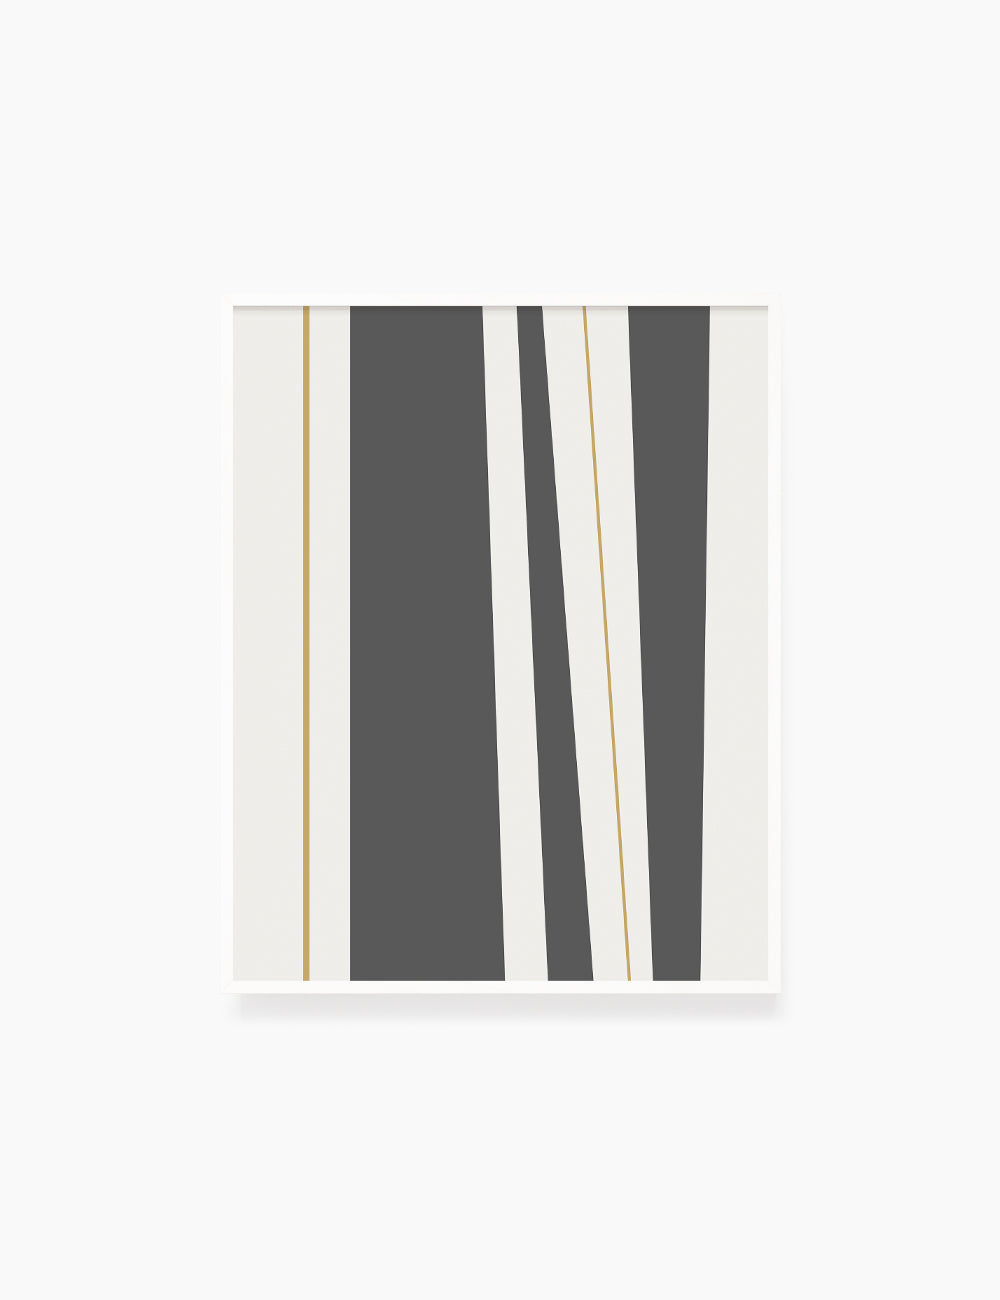 ABSTRACT MINIMAL LINES AND STRIPES. Printable Wall Art Illustration. Stripes and lines in dark grey, dull orange, and beige. Abstract art. Minimal design. Geometric print. Minimalist, abstract illustration art. Printable poster. | PAPER MOON Art & Design